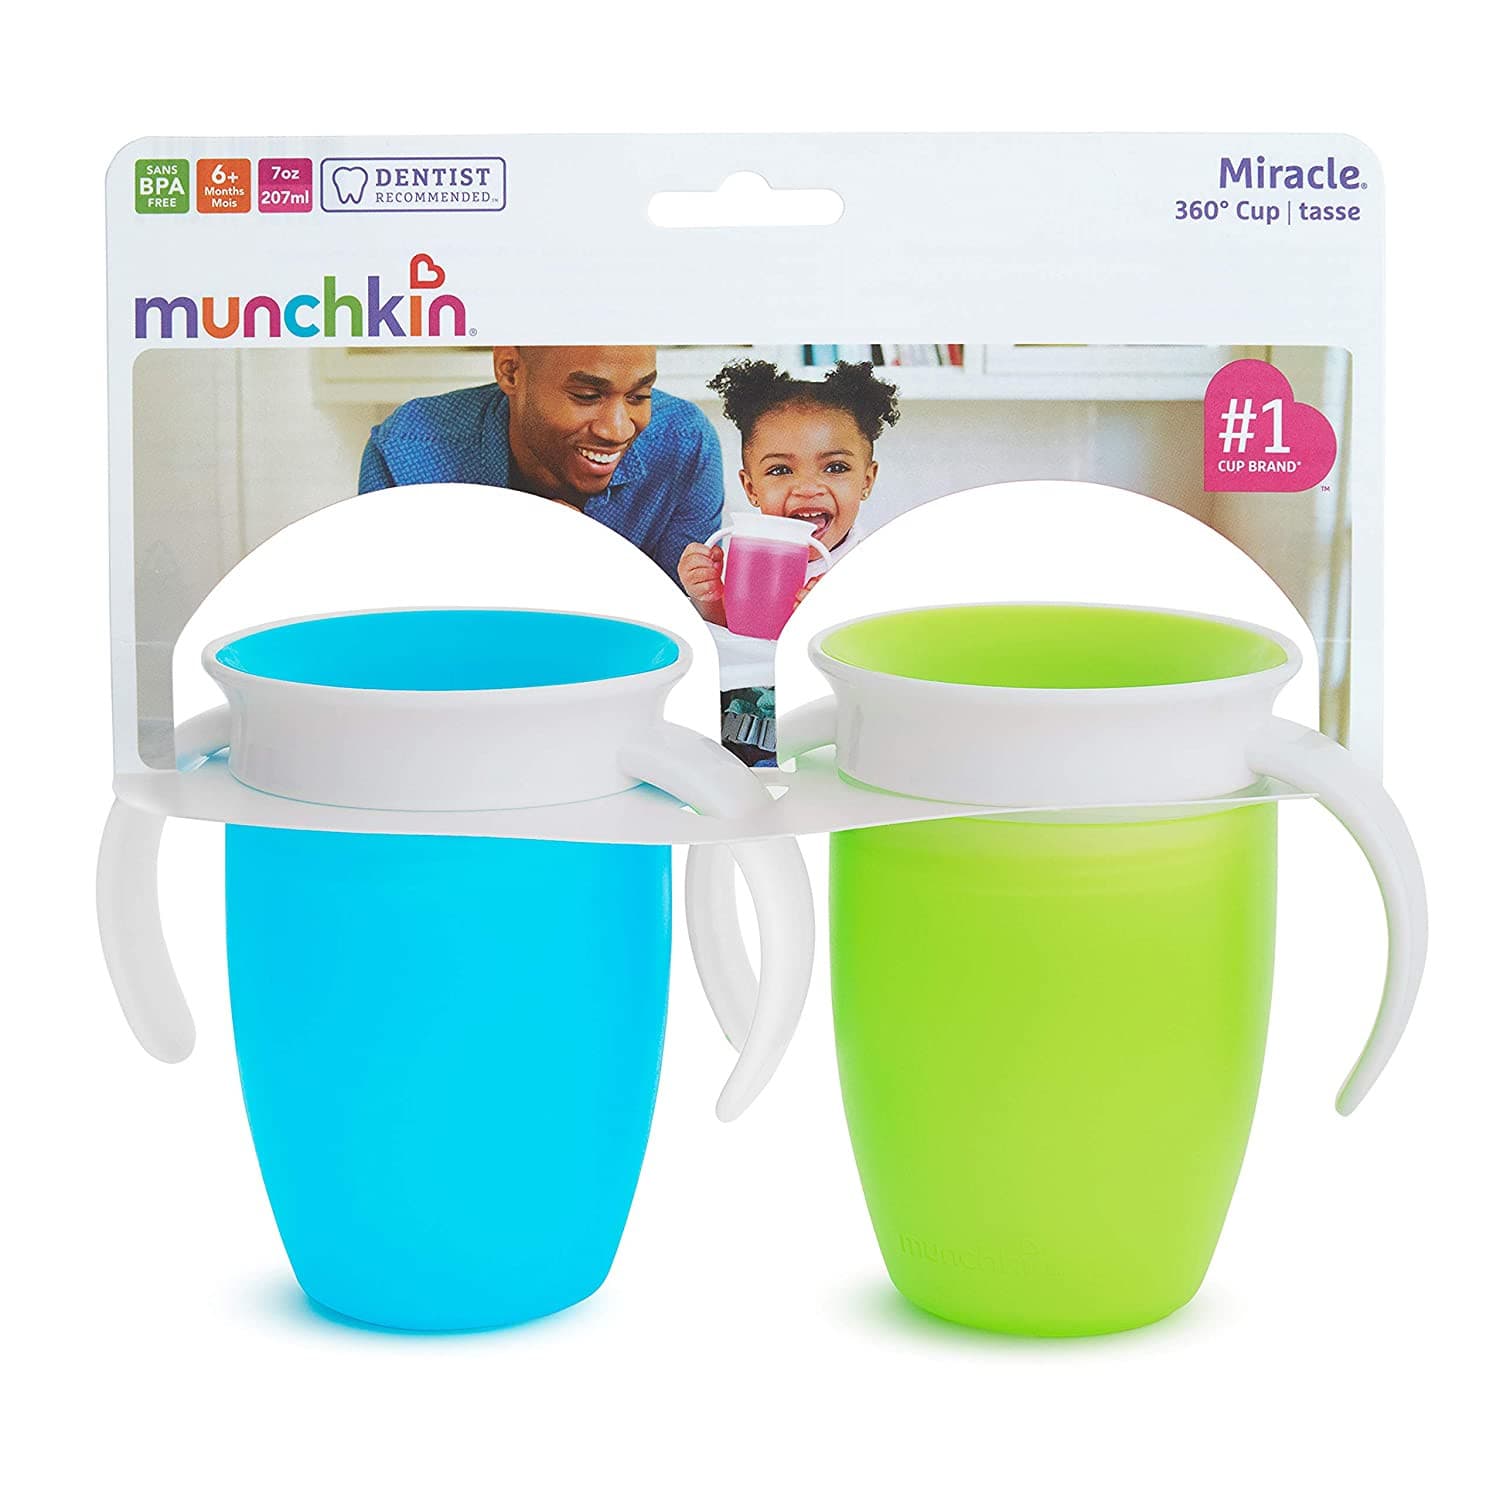 Munchkin Miracle 360 Trainer Cup, Green/Blue, 7 Oz, 2 Count.